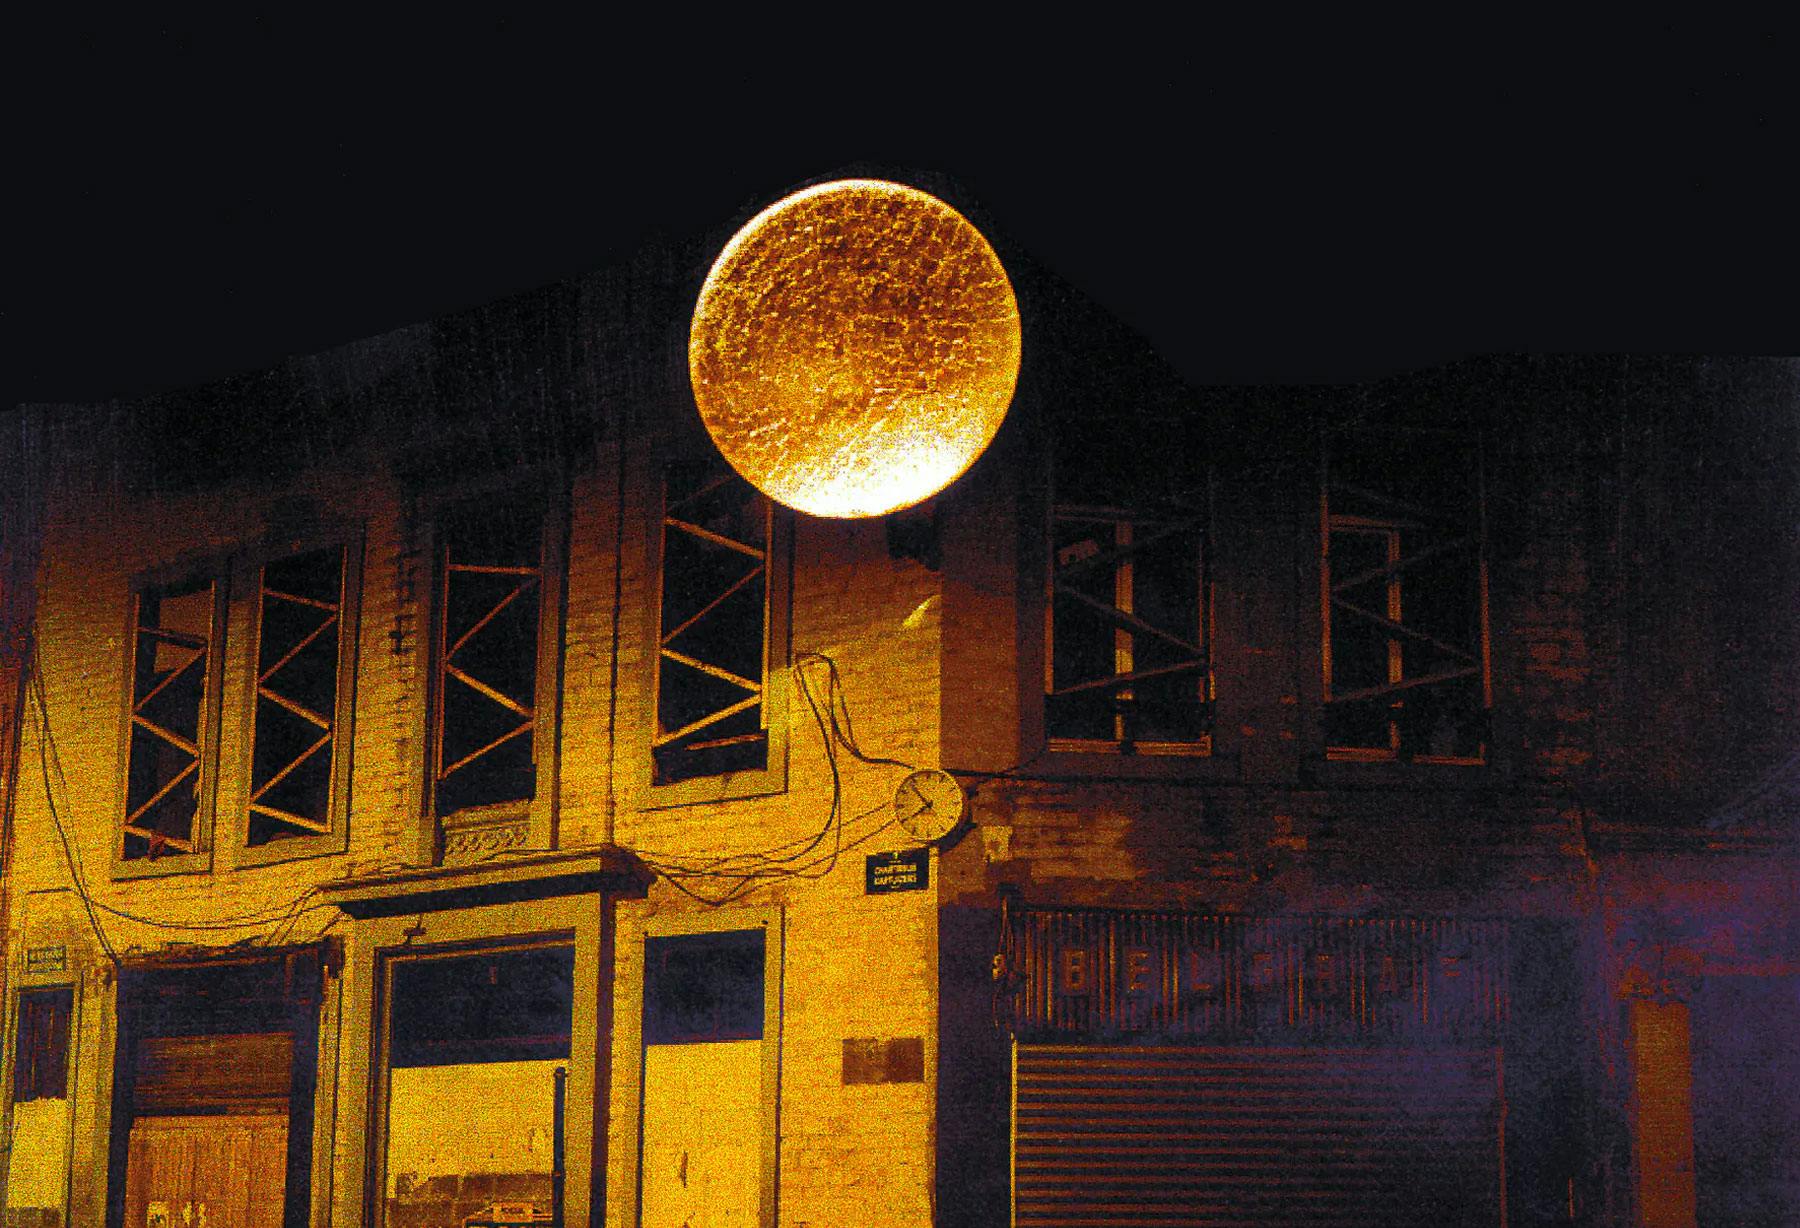 <p>In Rue des Chartreux, Bruxelles is installed the first “Luna Piena Gigante”, a disc with a diameter of 2,5 meters completely lined with gold coloured leaf. Another piece installed in the same place is Albero della luce, 5 meters high, provided with 50 beams of optical fiber light.</p>
